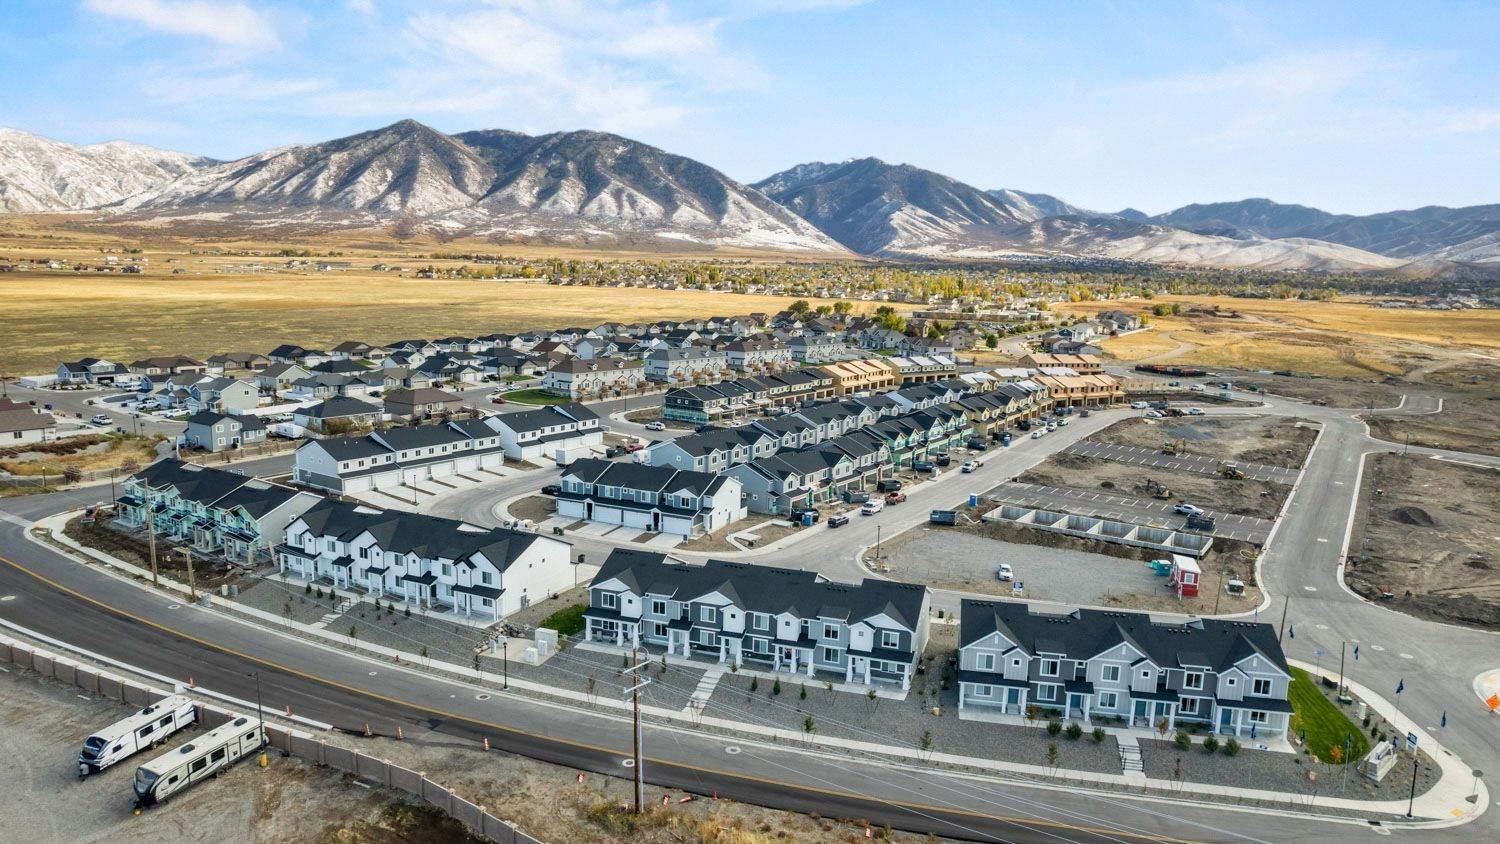 3. Western Acres xây dựng tại 259 East Serenity Avenue, Tooele, UT 84074